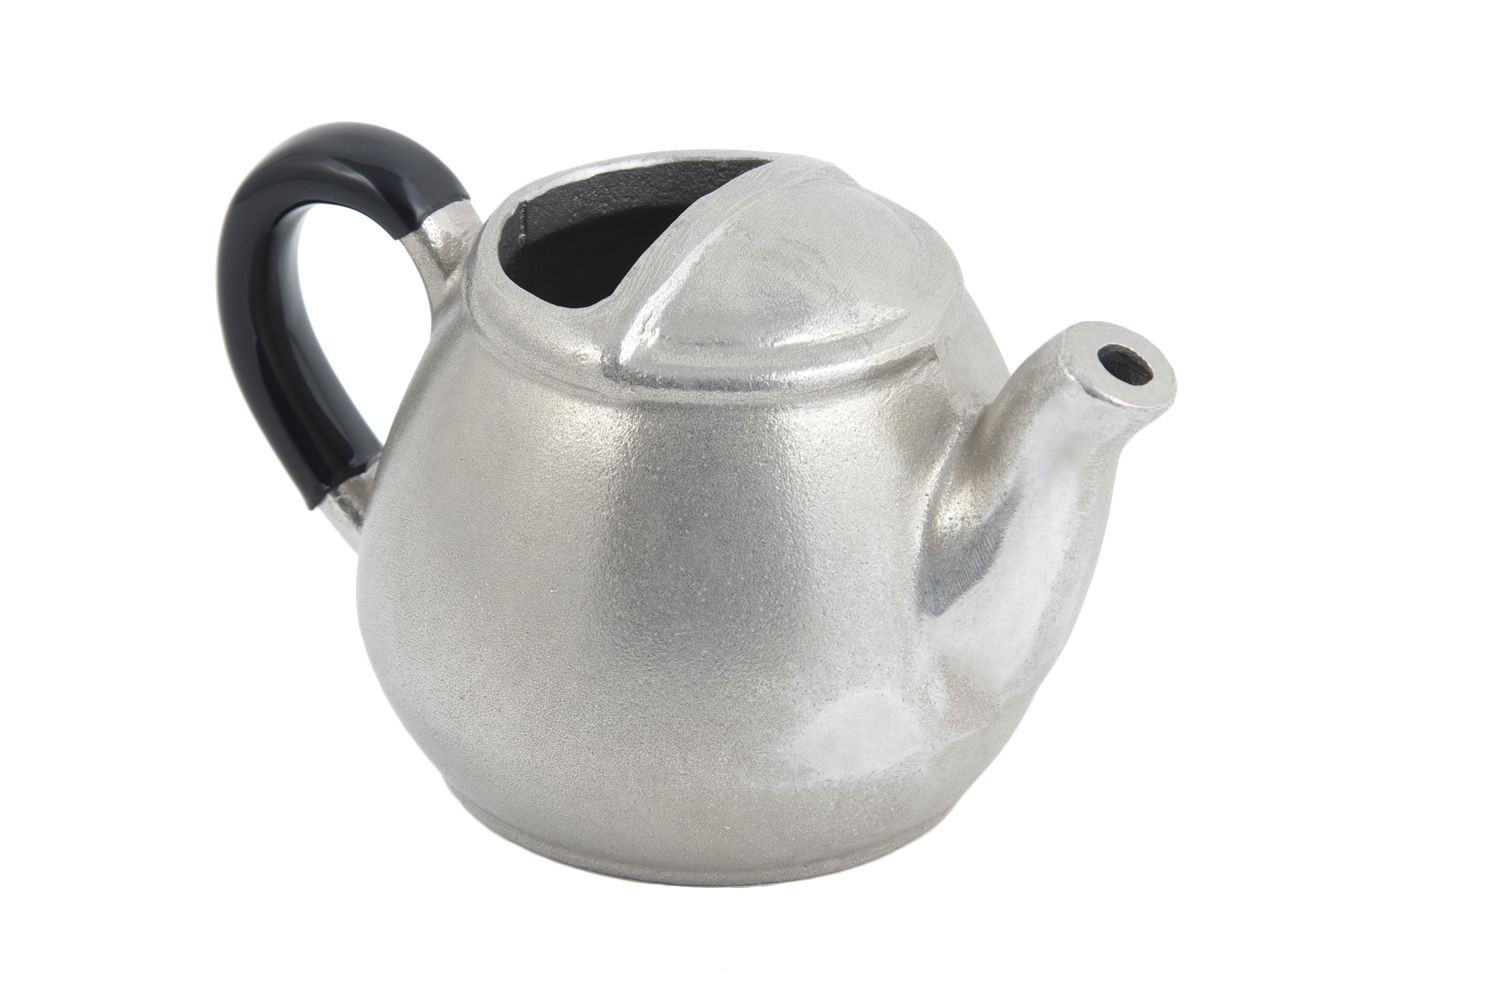 https://www.lionsdeal.com/itempics/Bon-Chef-4040P-Coverless-Teapot-with-Insulated-Handle--Pewter-Glo-16-oz---Set-of-6-33051_xlarge.jpg